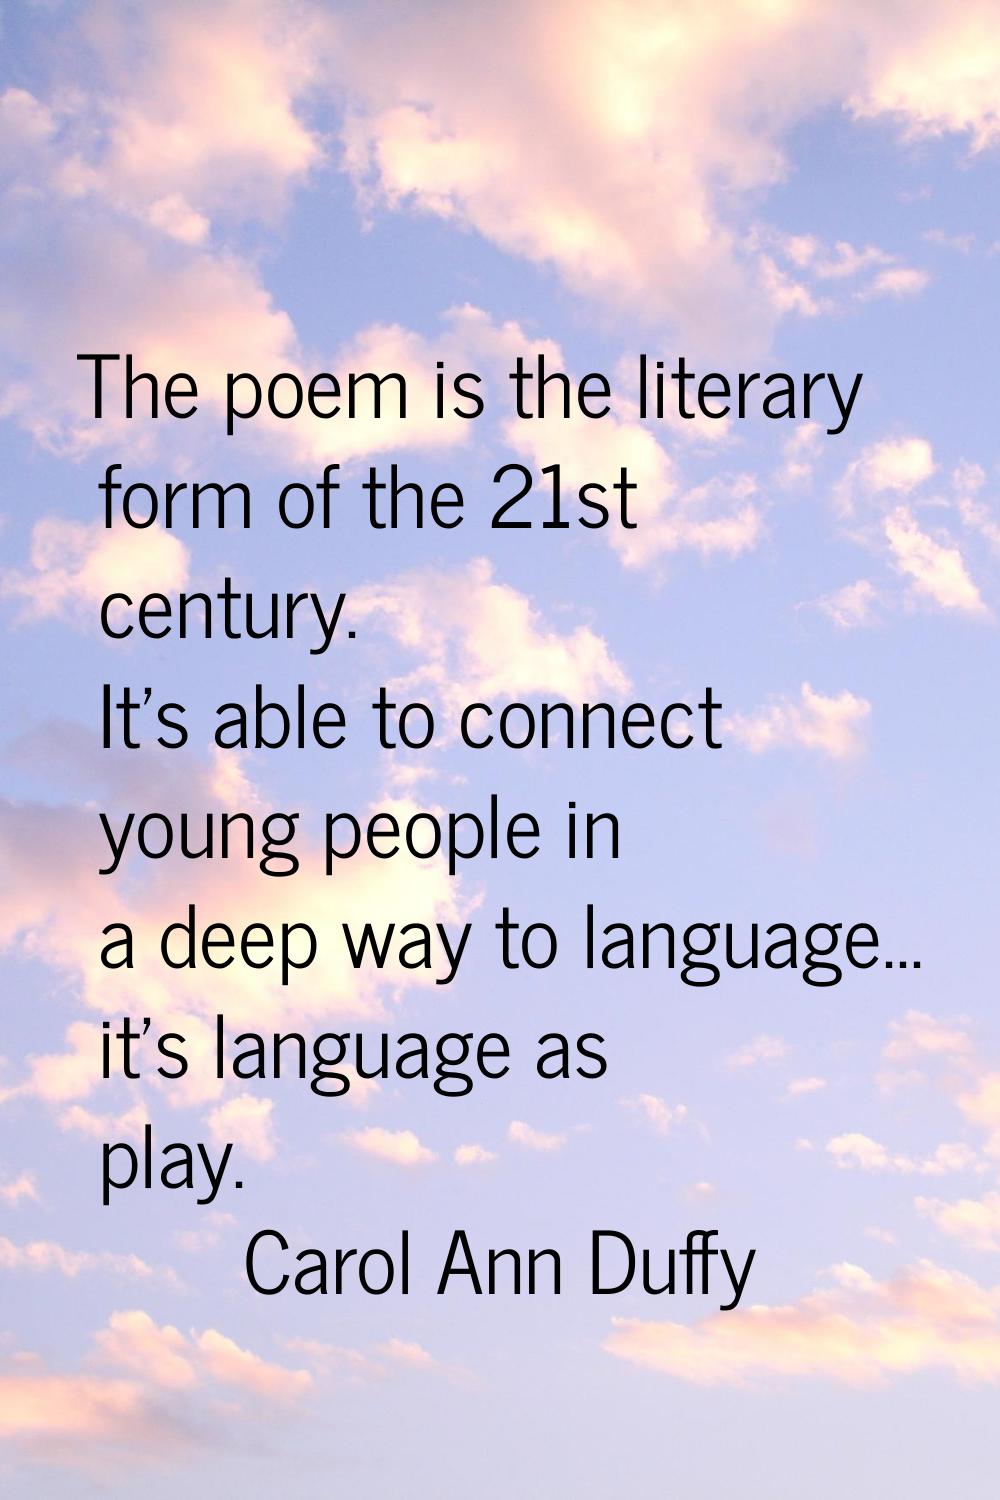 The poem is the literary form of the 21st century. It's able to connect young people in a deep way 